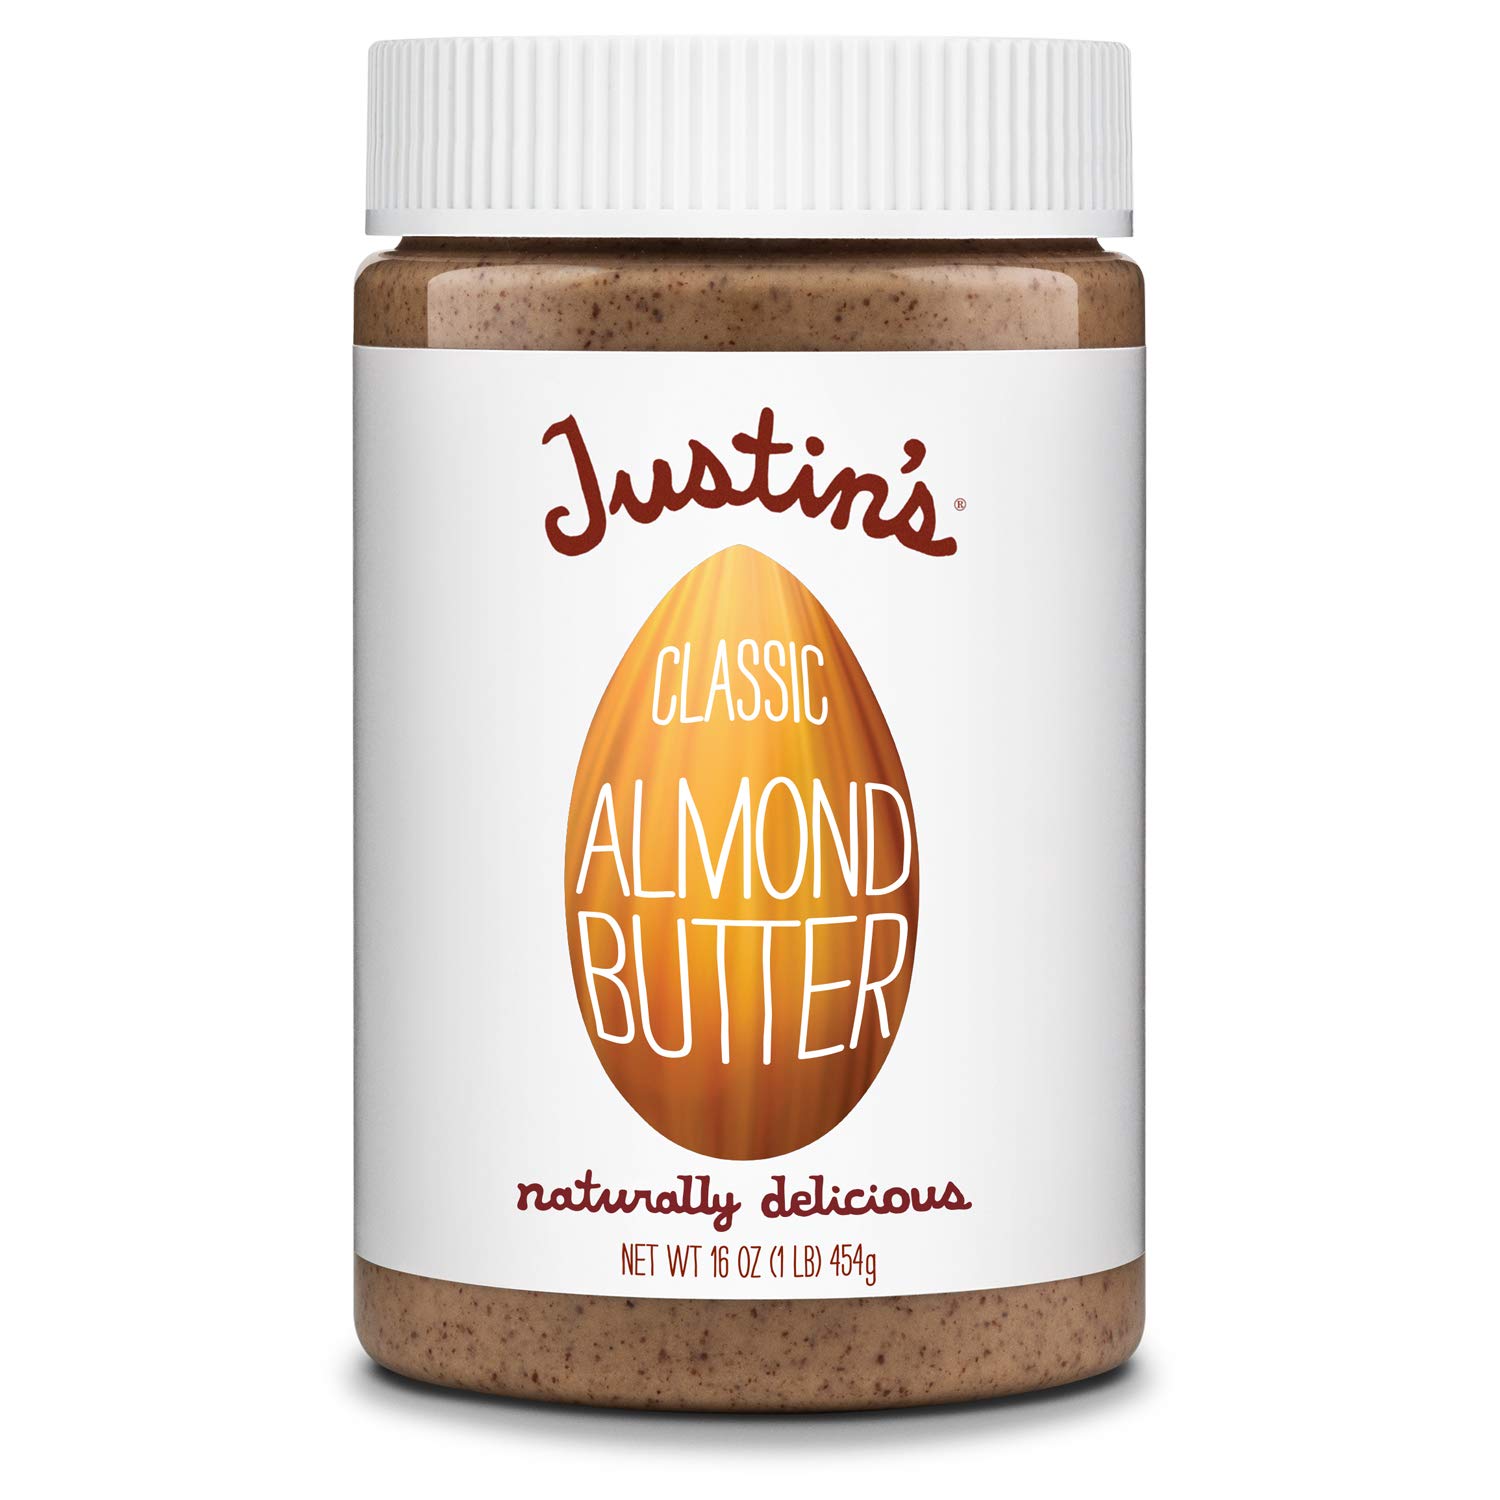 Justin’s Classic Almond Butter